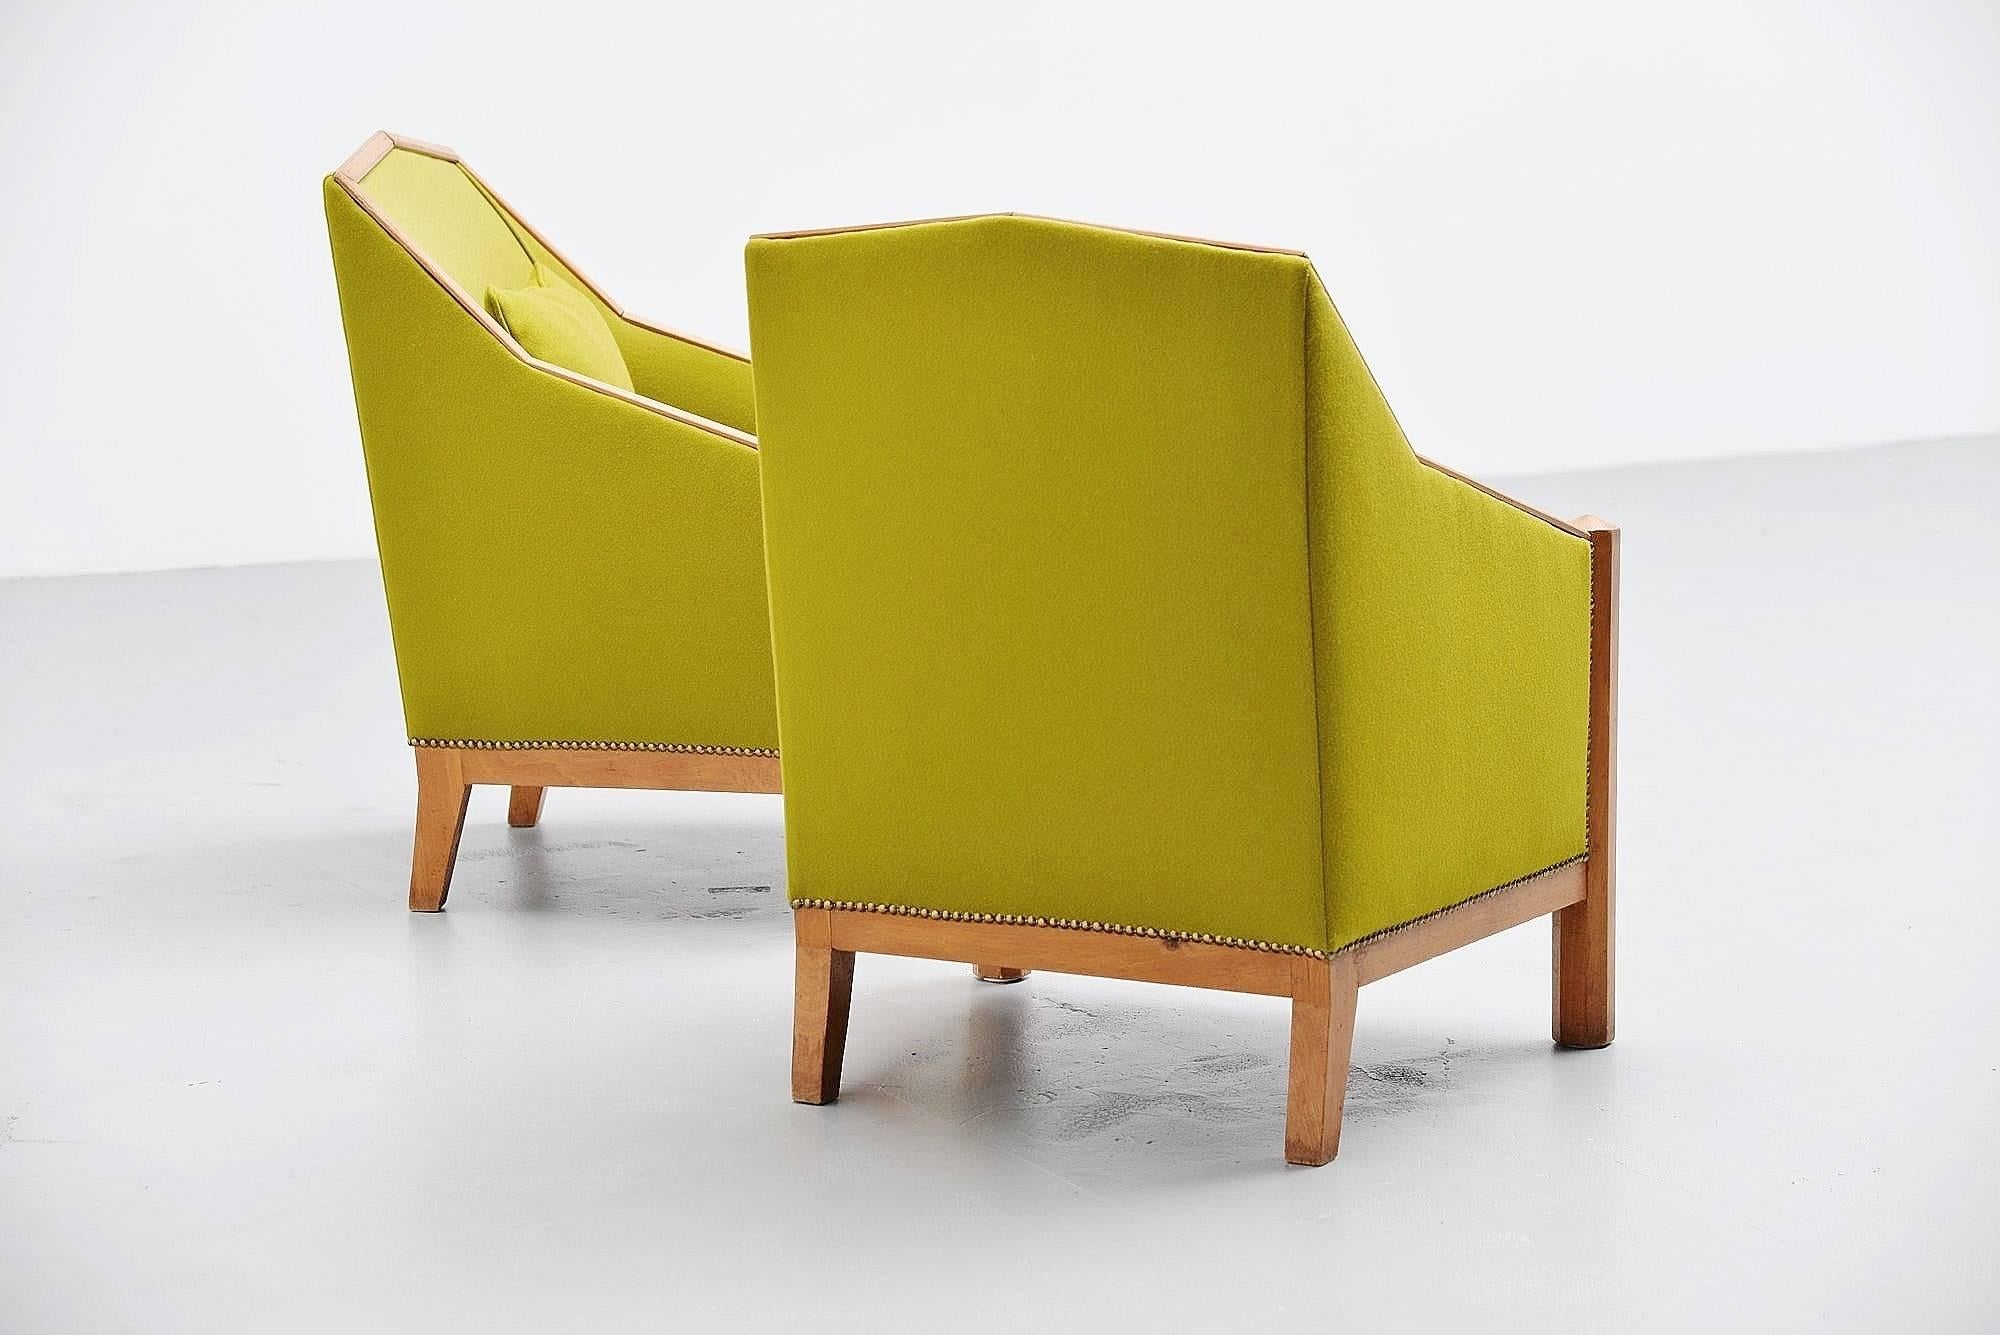 Very nice and unusual club chairs in the Amsterdams School style, Holland 1930. These Art Deco chairs have a very nice and unusual kind of church building shape. And they have very nice (close to the original color) green upholstery by Kvadrat. Very